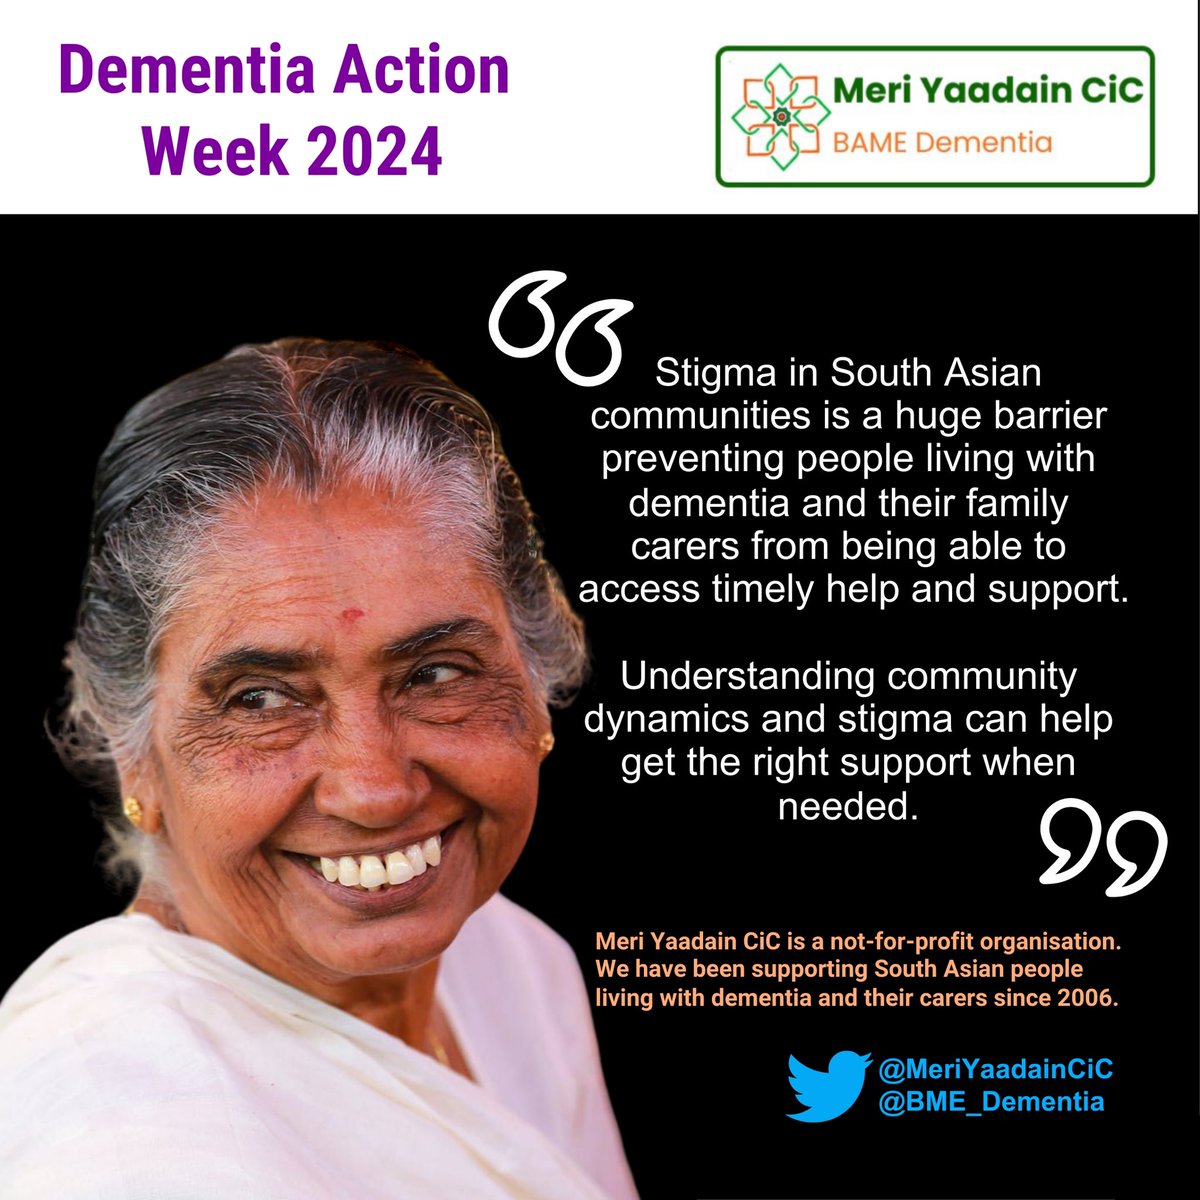 Day 5 of 7 of Dementia Action Week. Our infographic for today. .@MeriYaadainCiC 18 years of supporting ethnically diverse communities across the UK (and beyond)